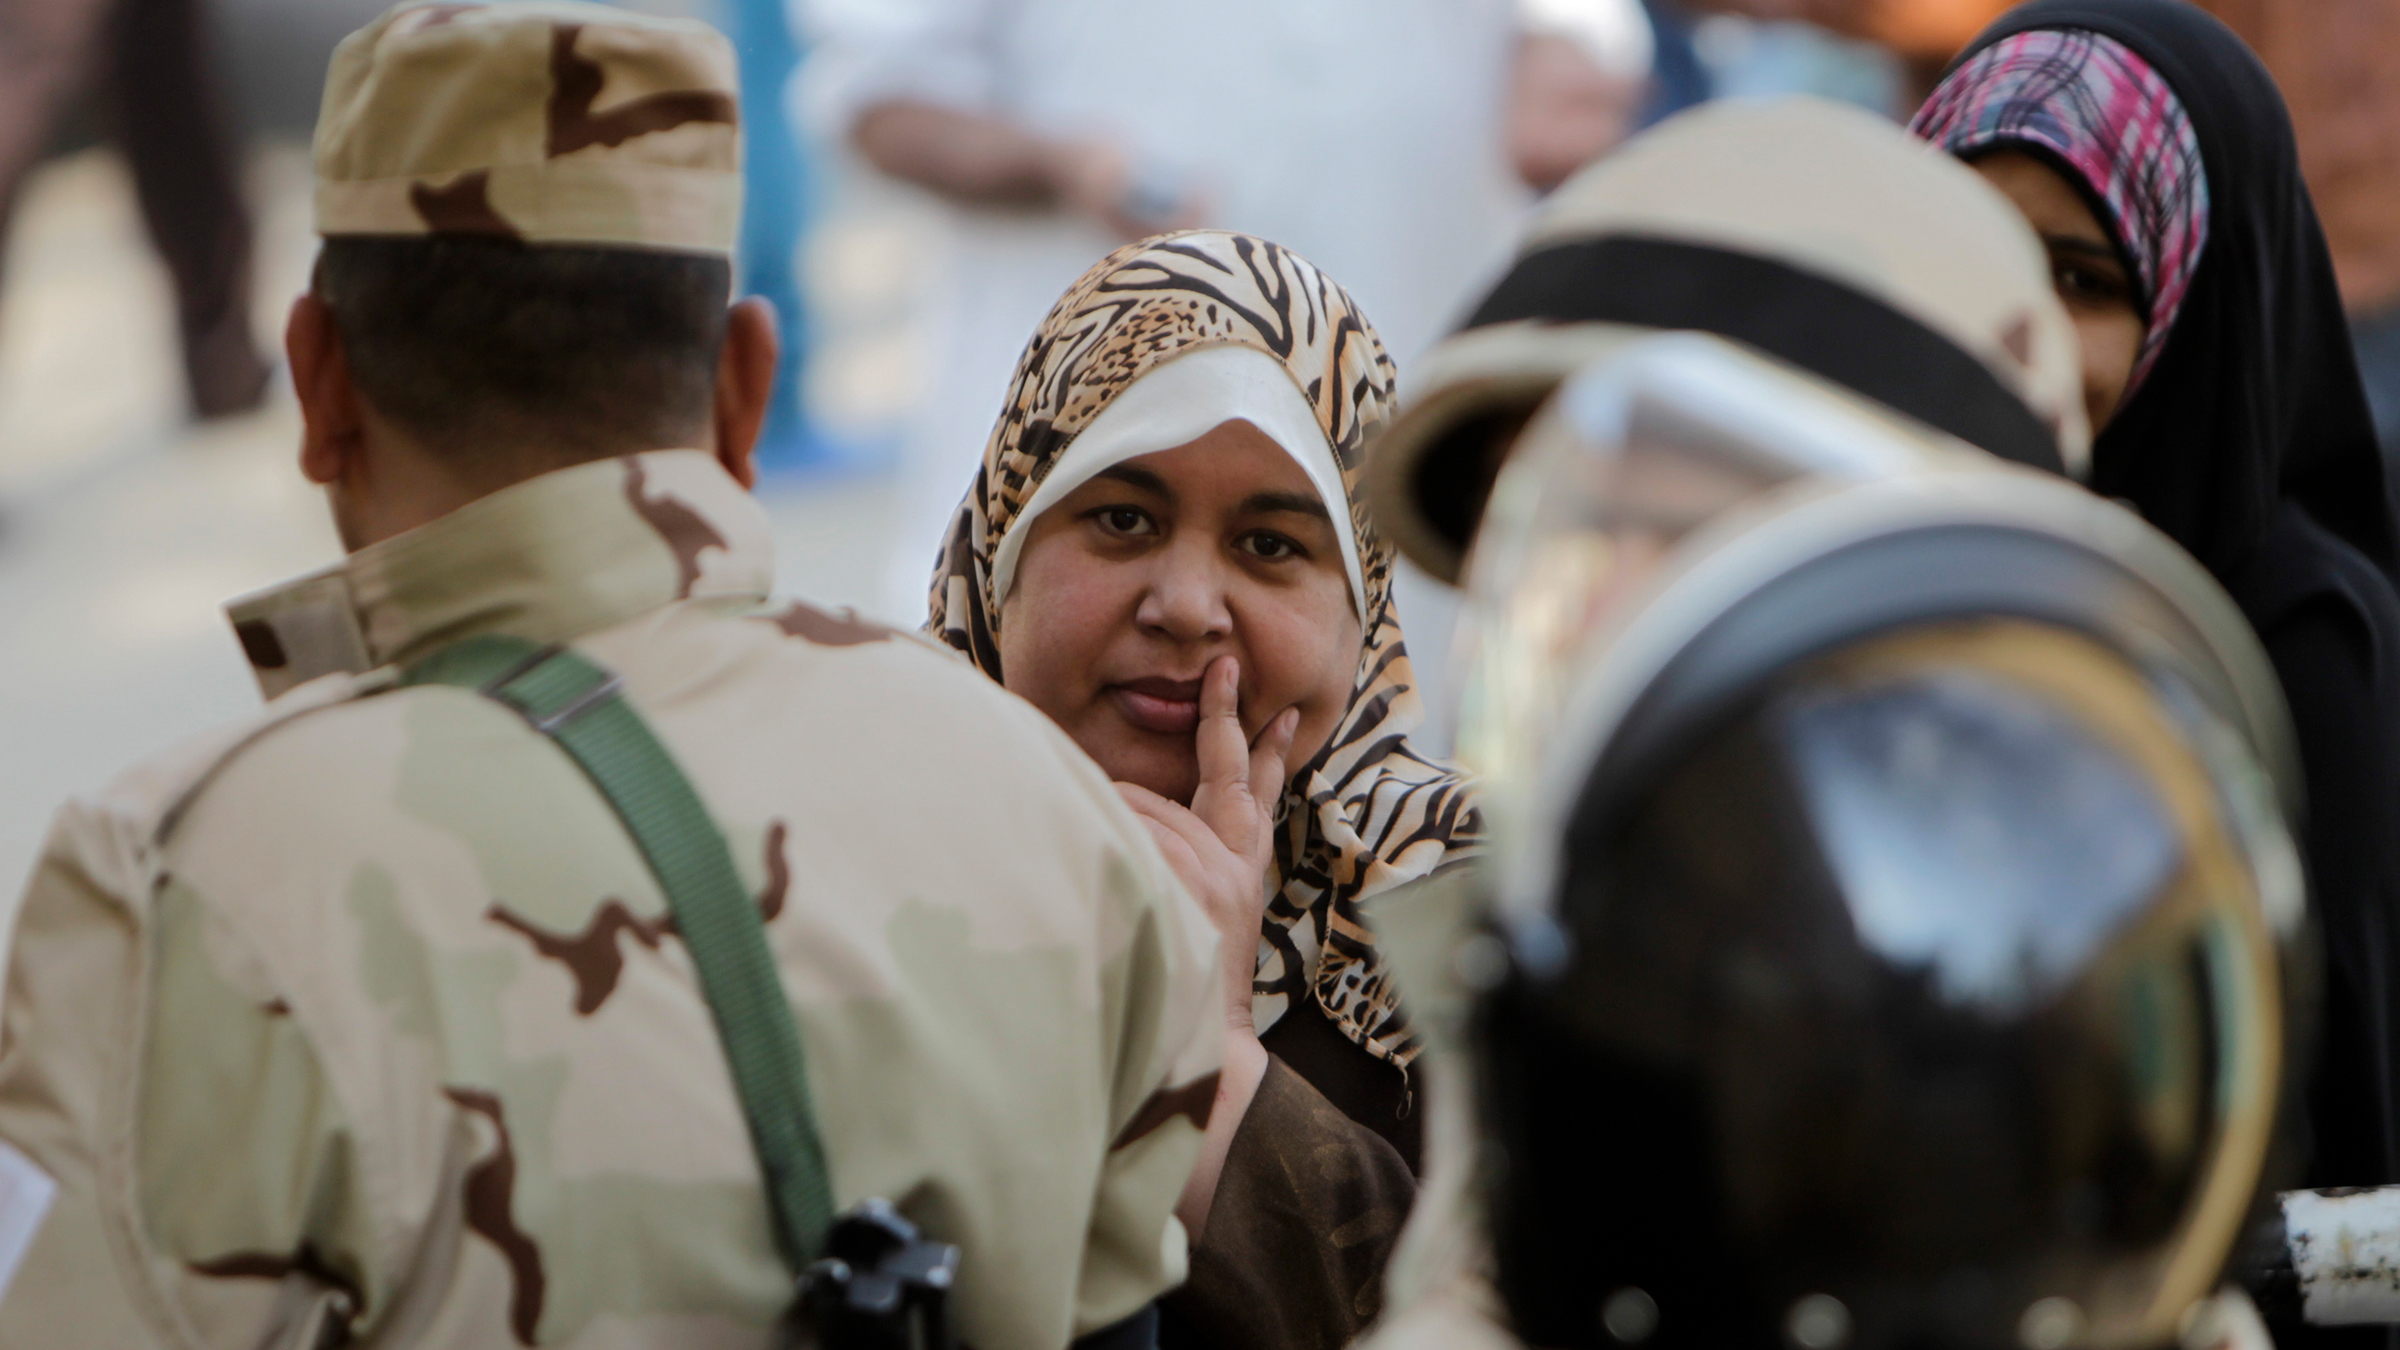 Soldiers guards women in Cairo